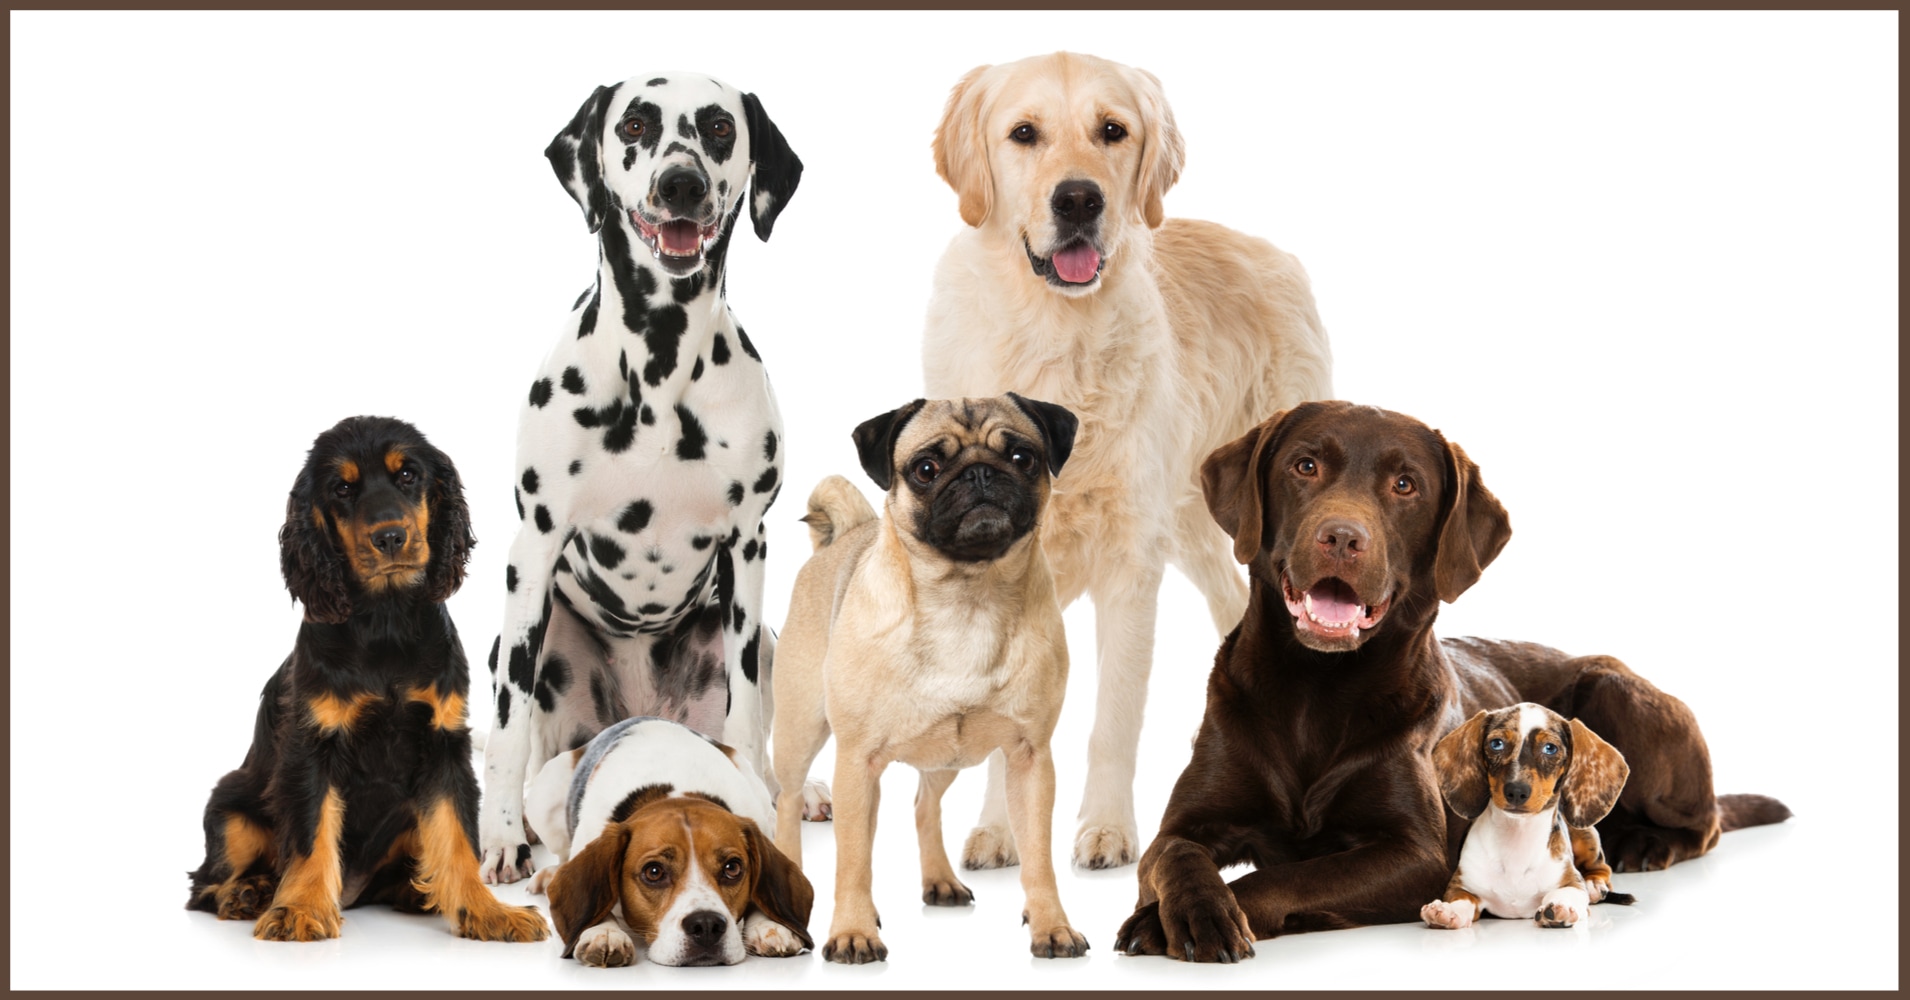 Are You A Dog Breed Expert? Quiz